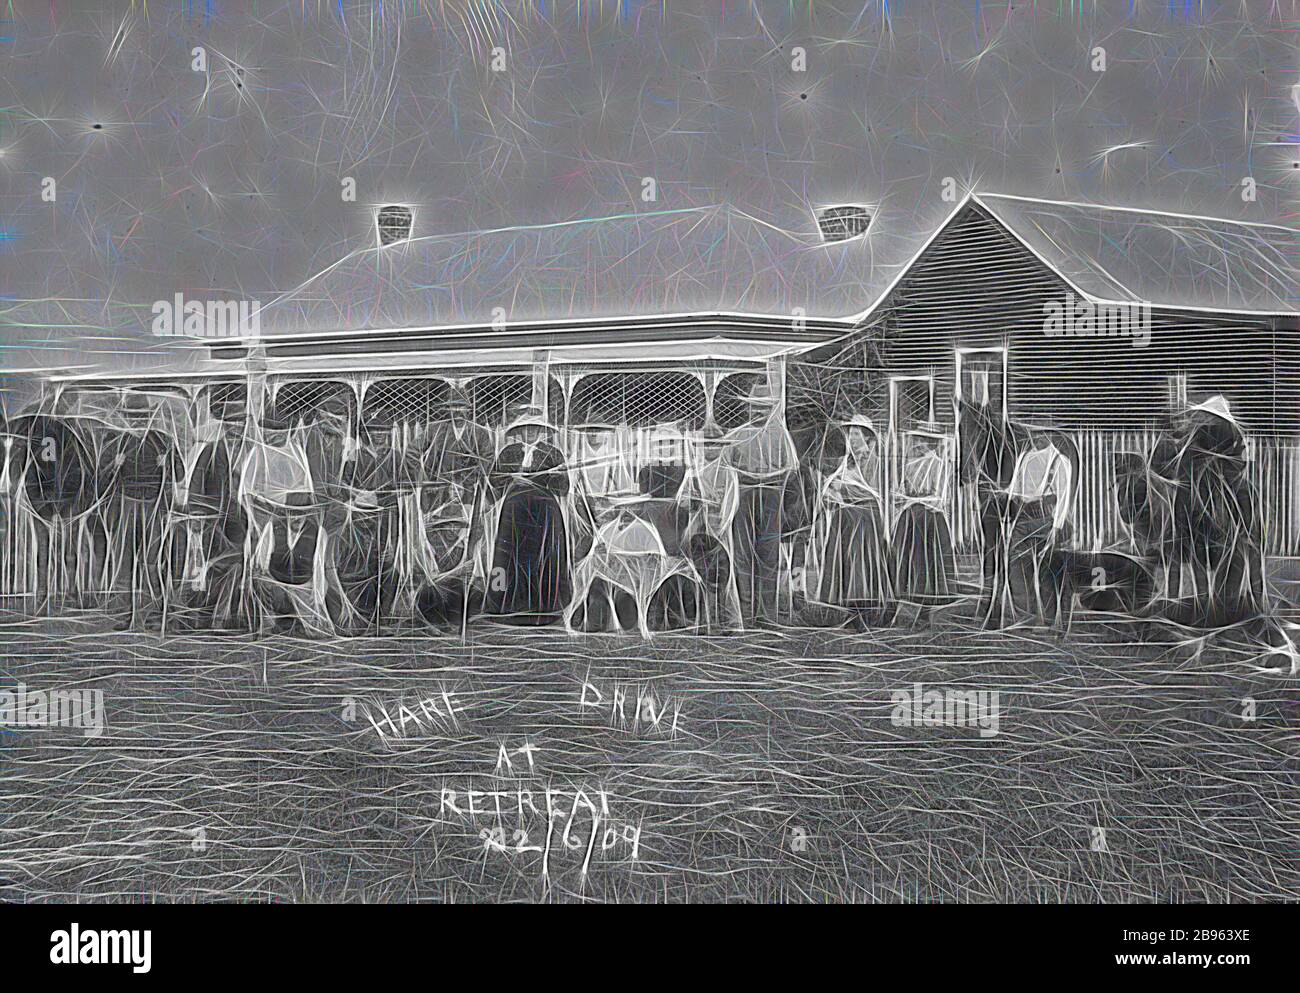 Negative - Boggabri, New South Wales, Jun 1909, A hunting party at a hare drive., Reimagined by Gibon, design of warm cheerful glowing of brightness and light rays radiance. Classic art reinvented with a modern twist. Photography inspired by futurism, embracing dynamic energy of modern technology, movement, speed and revolutionize culture. Stock Photo